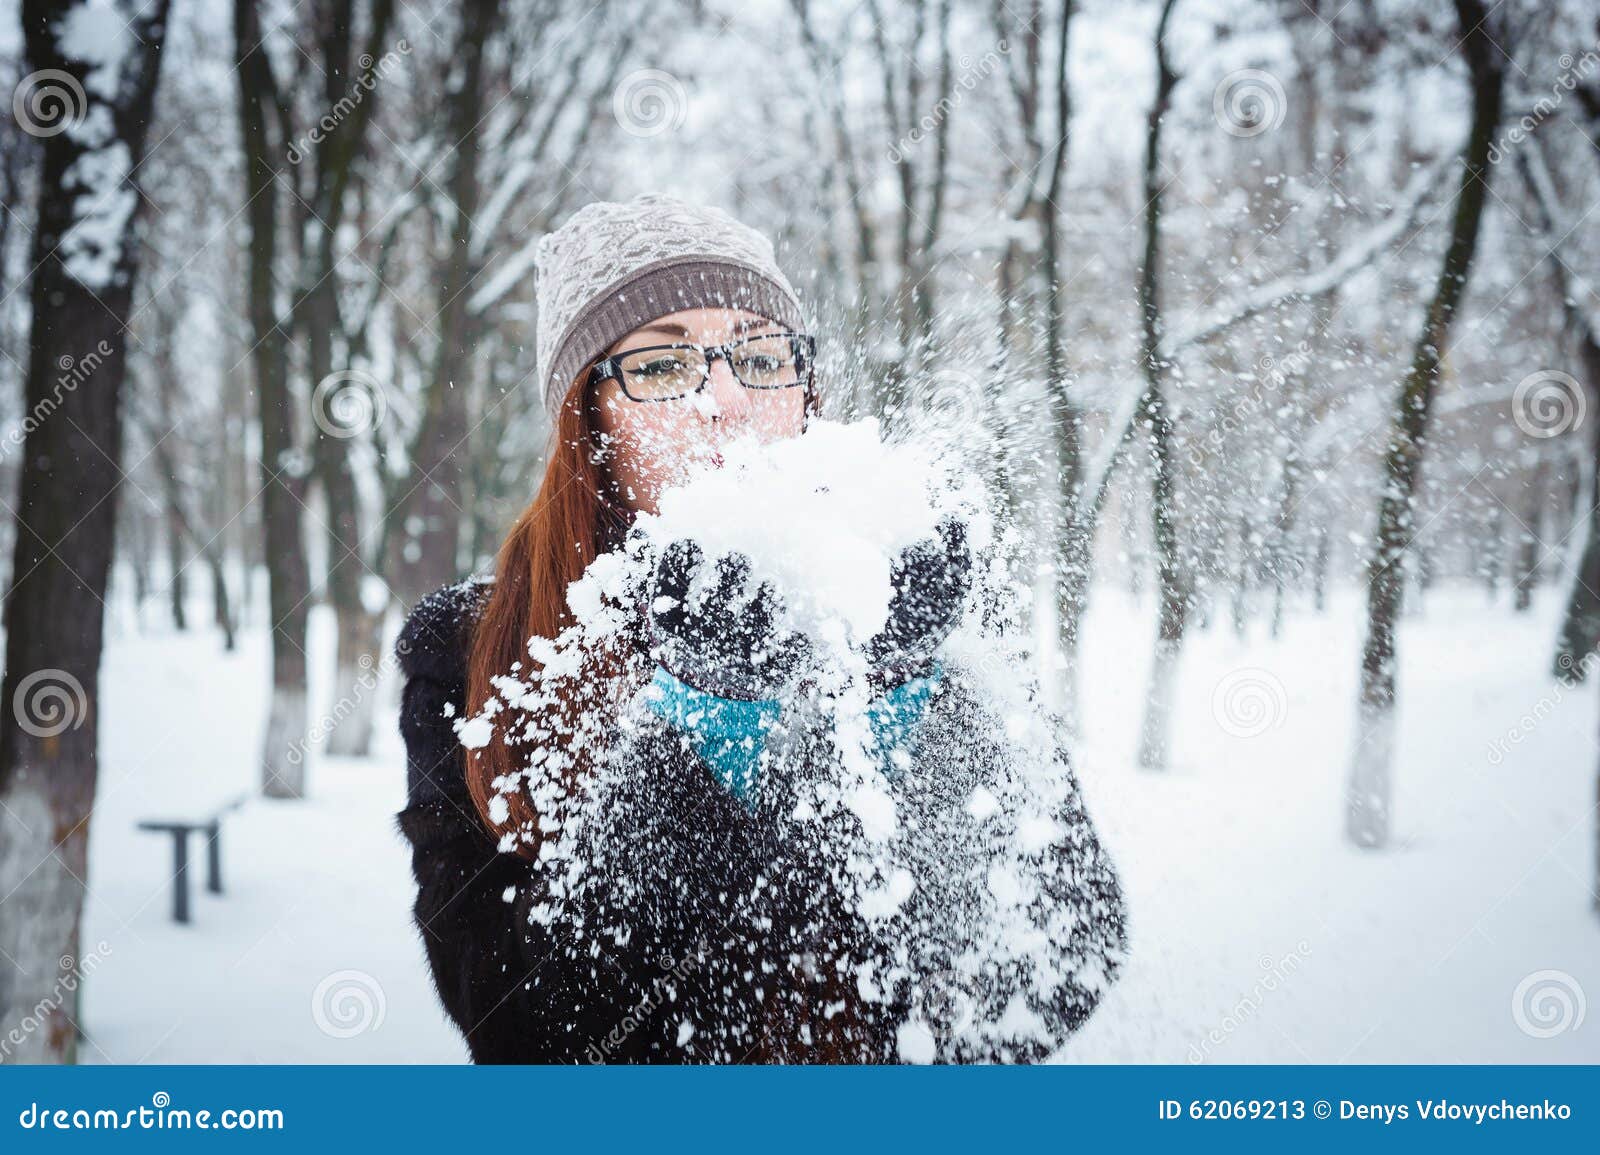 Beauty Winter Girl Blowing Snow in Frosty Winter Park Stock Image ...